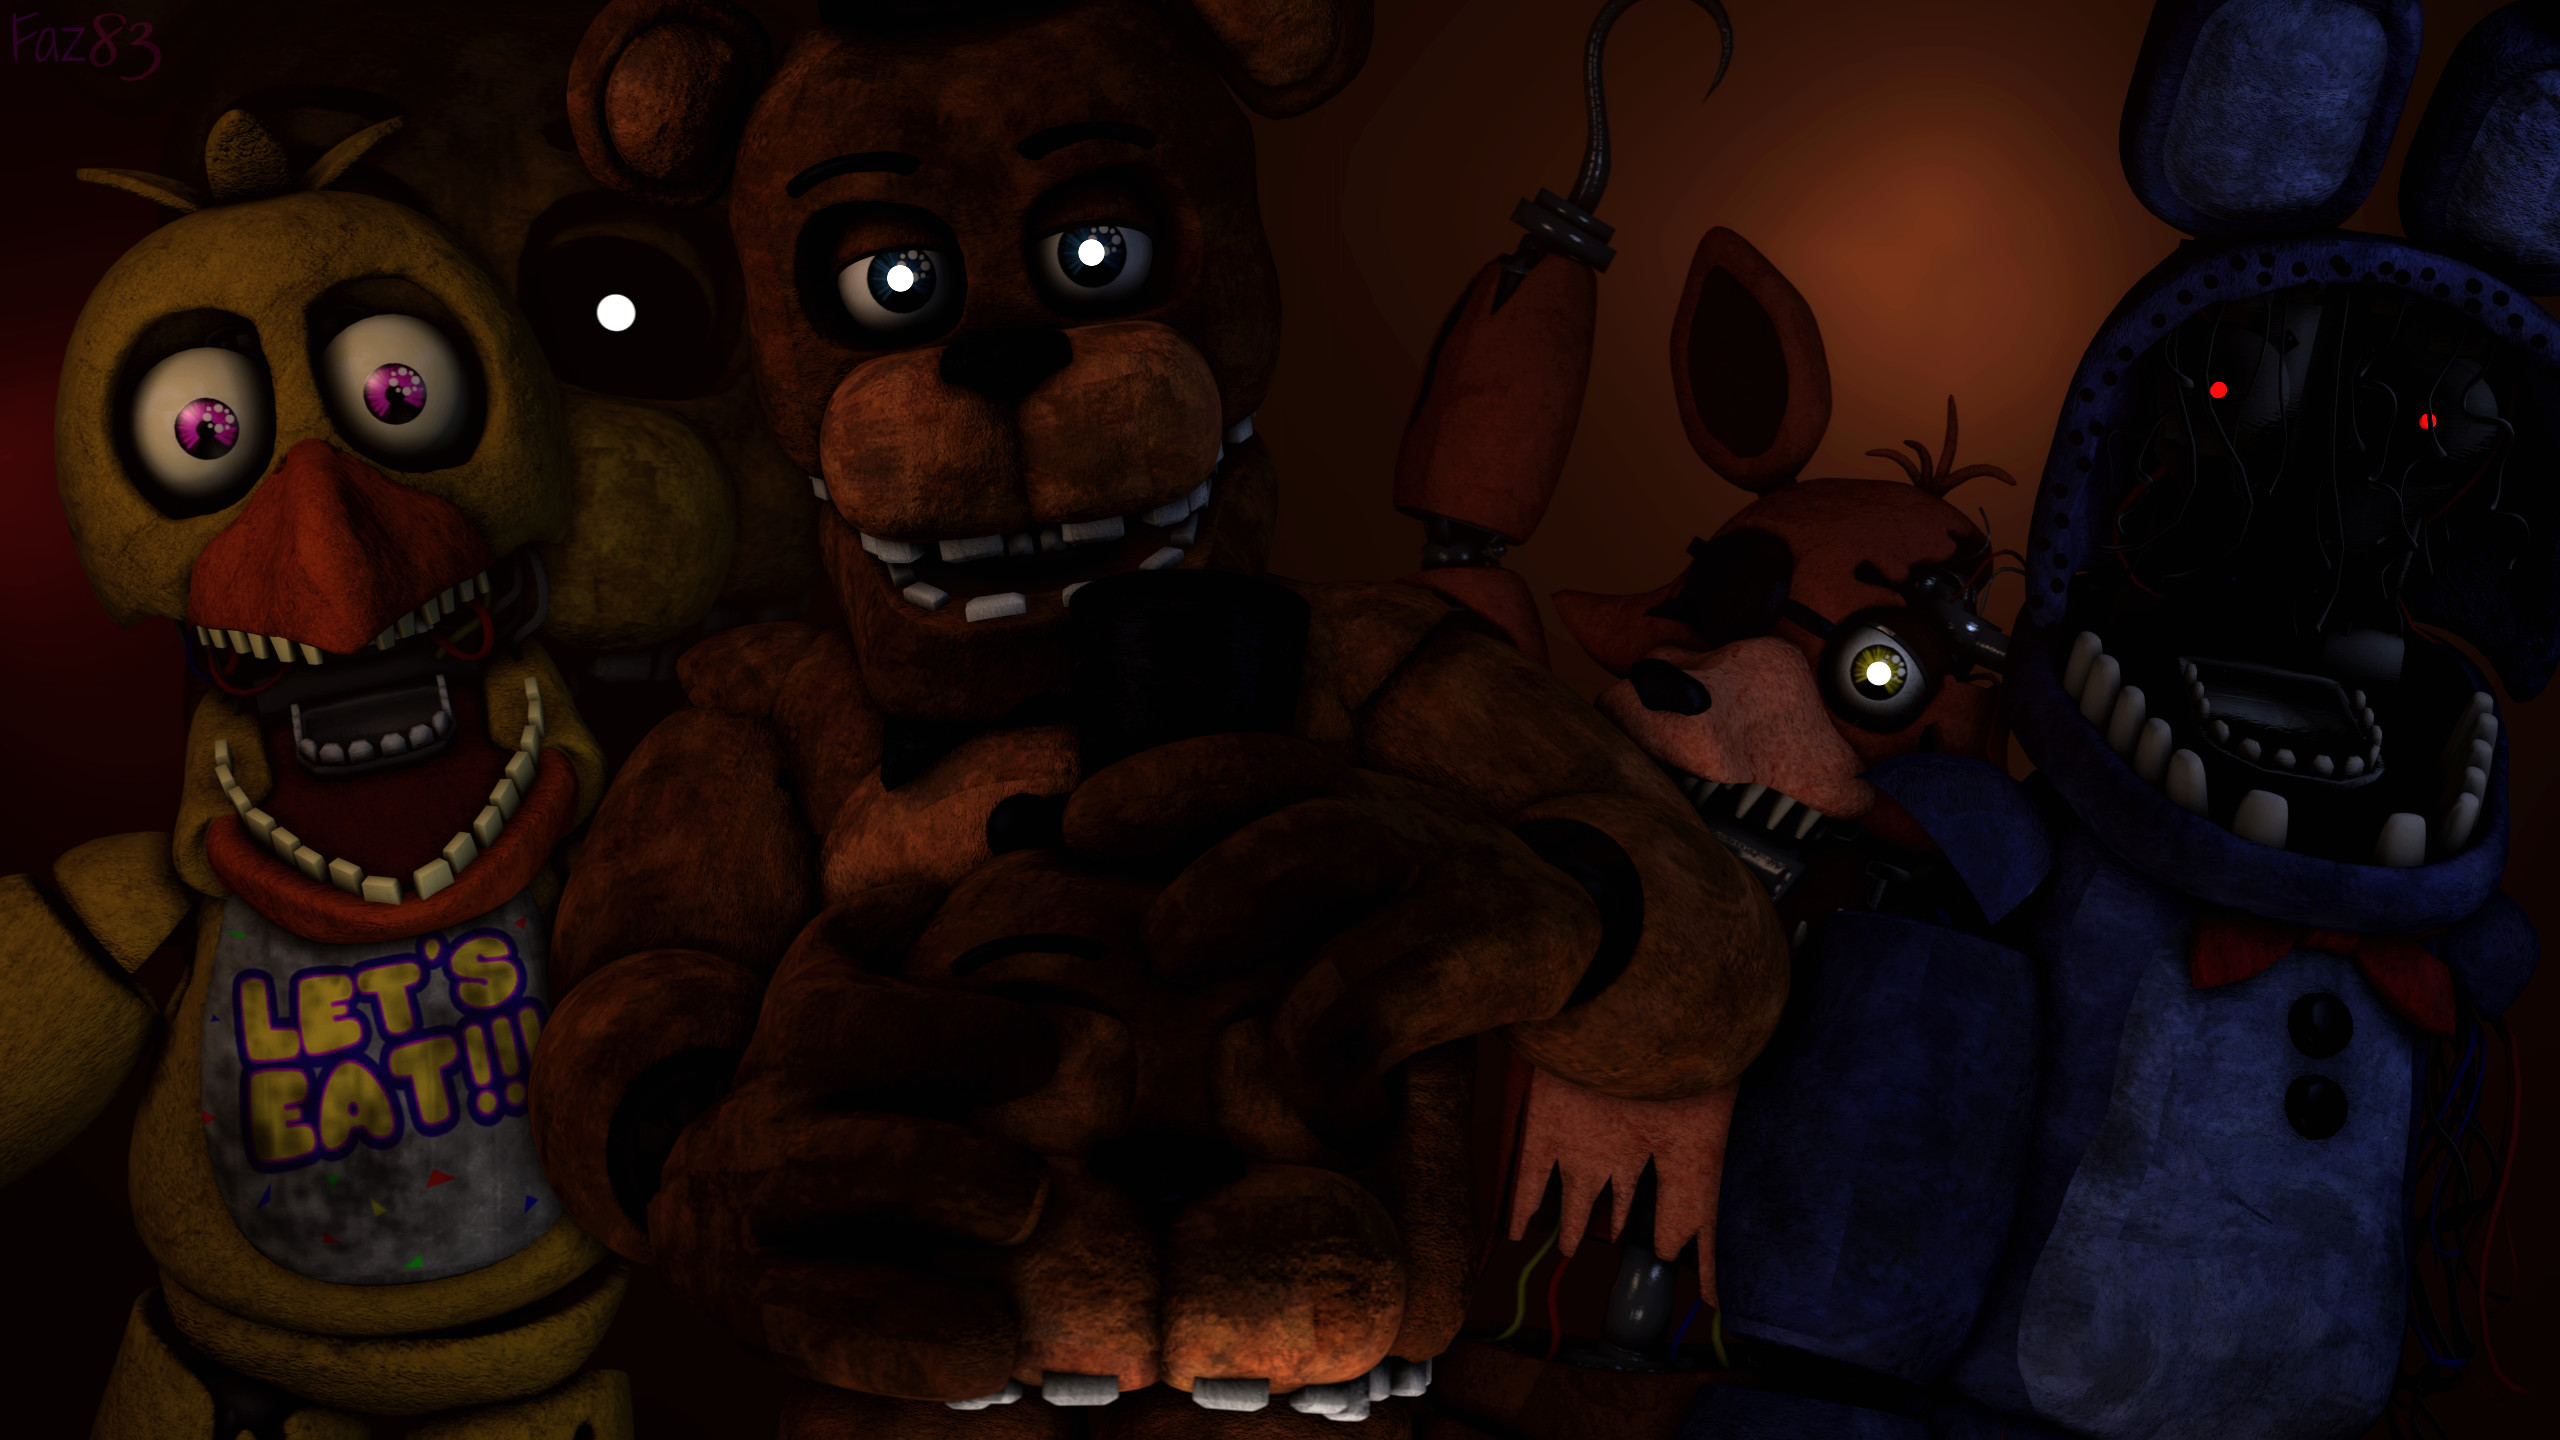 … (SFM/FNAF 2/Wallpaper) The withered gang by Fazband83